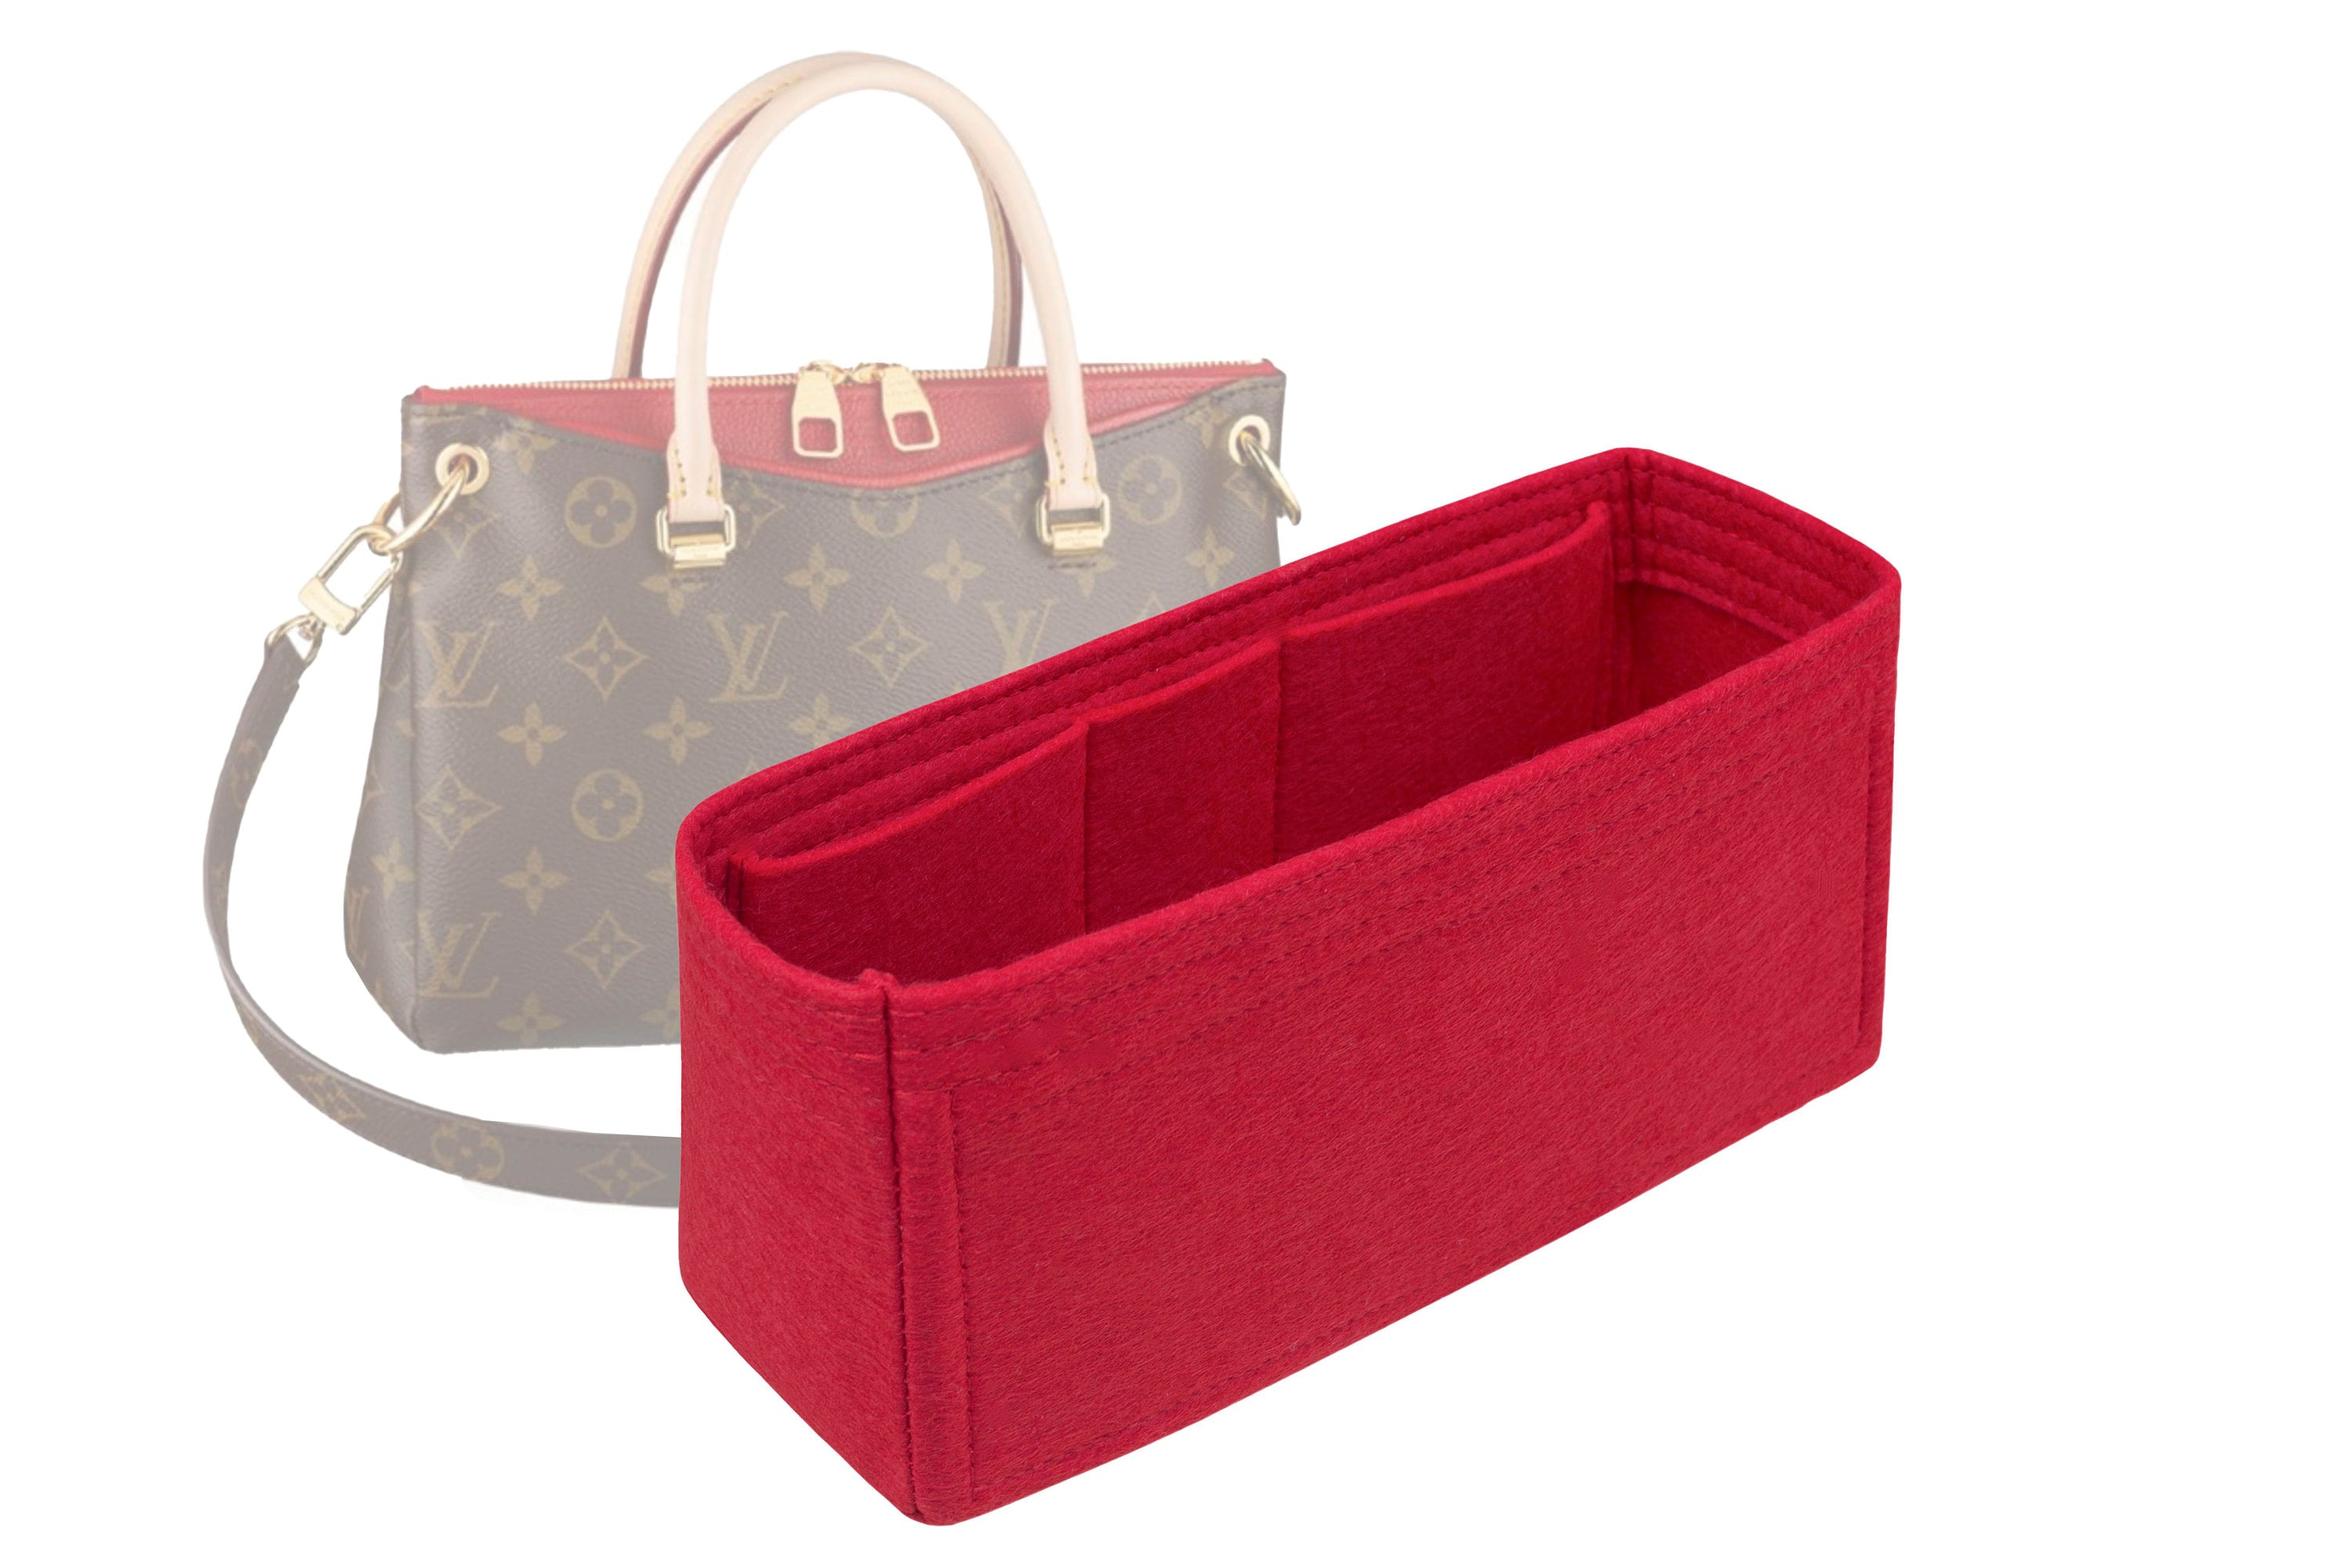 for Neverfull MM-Bottom 32 cm/12.5 Inches Customizable Fabric Lined Felt Organizer in 18cm/7inches Height, Bag Liner, Red